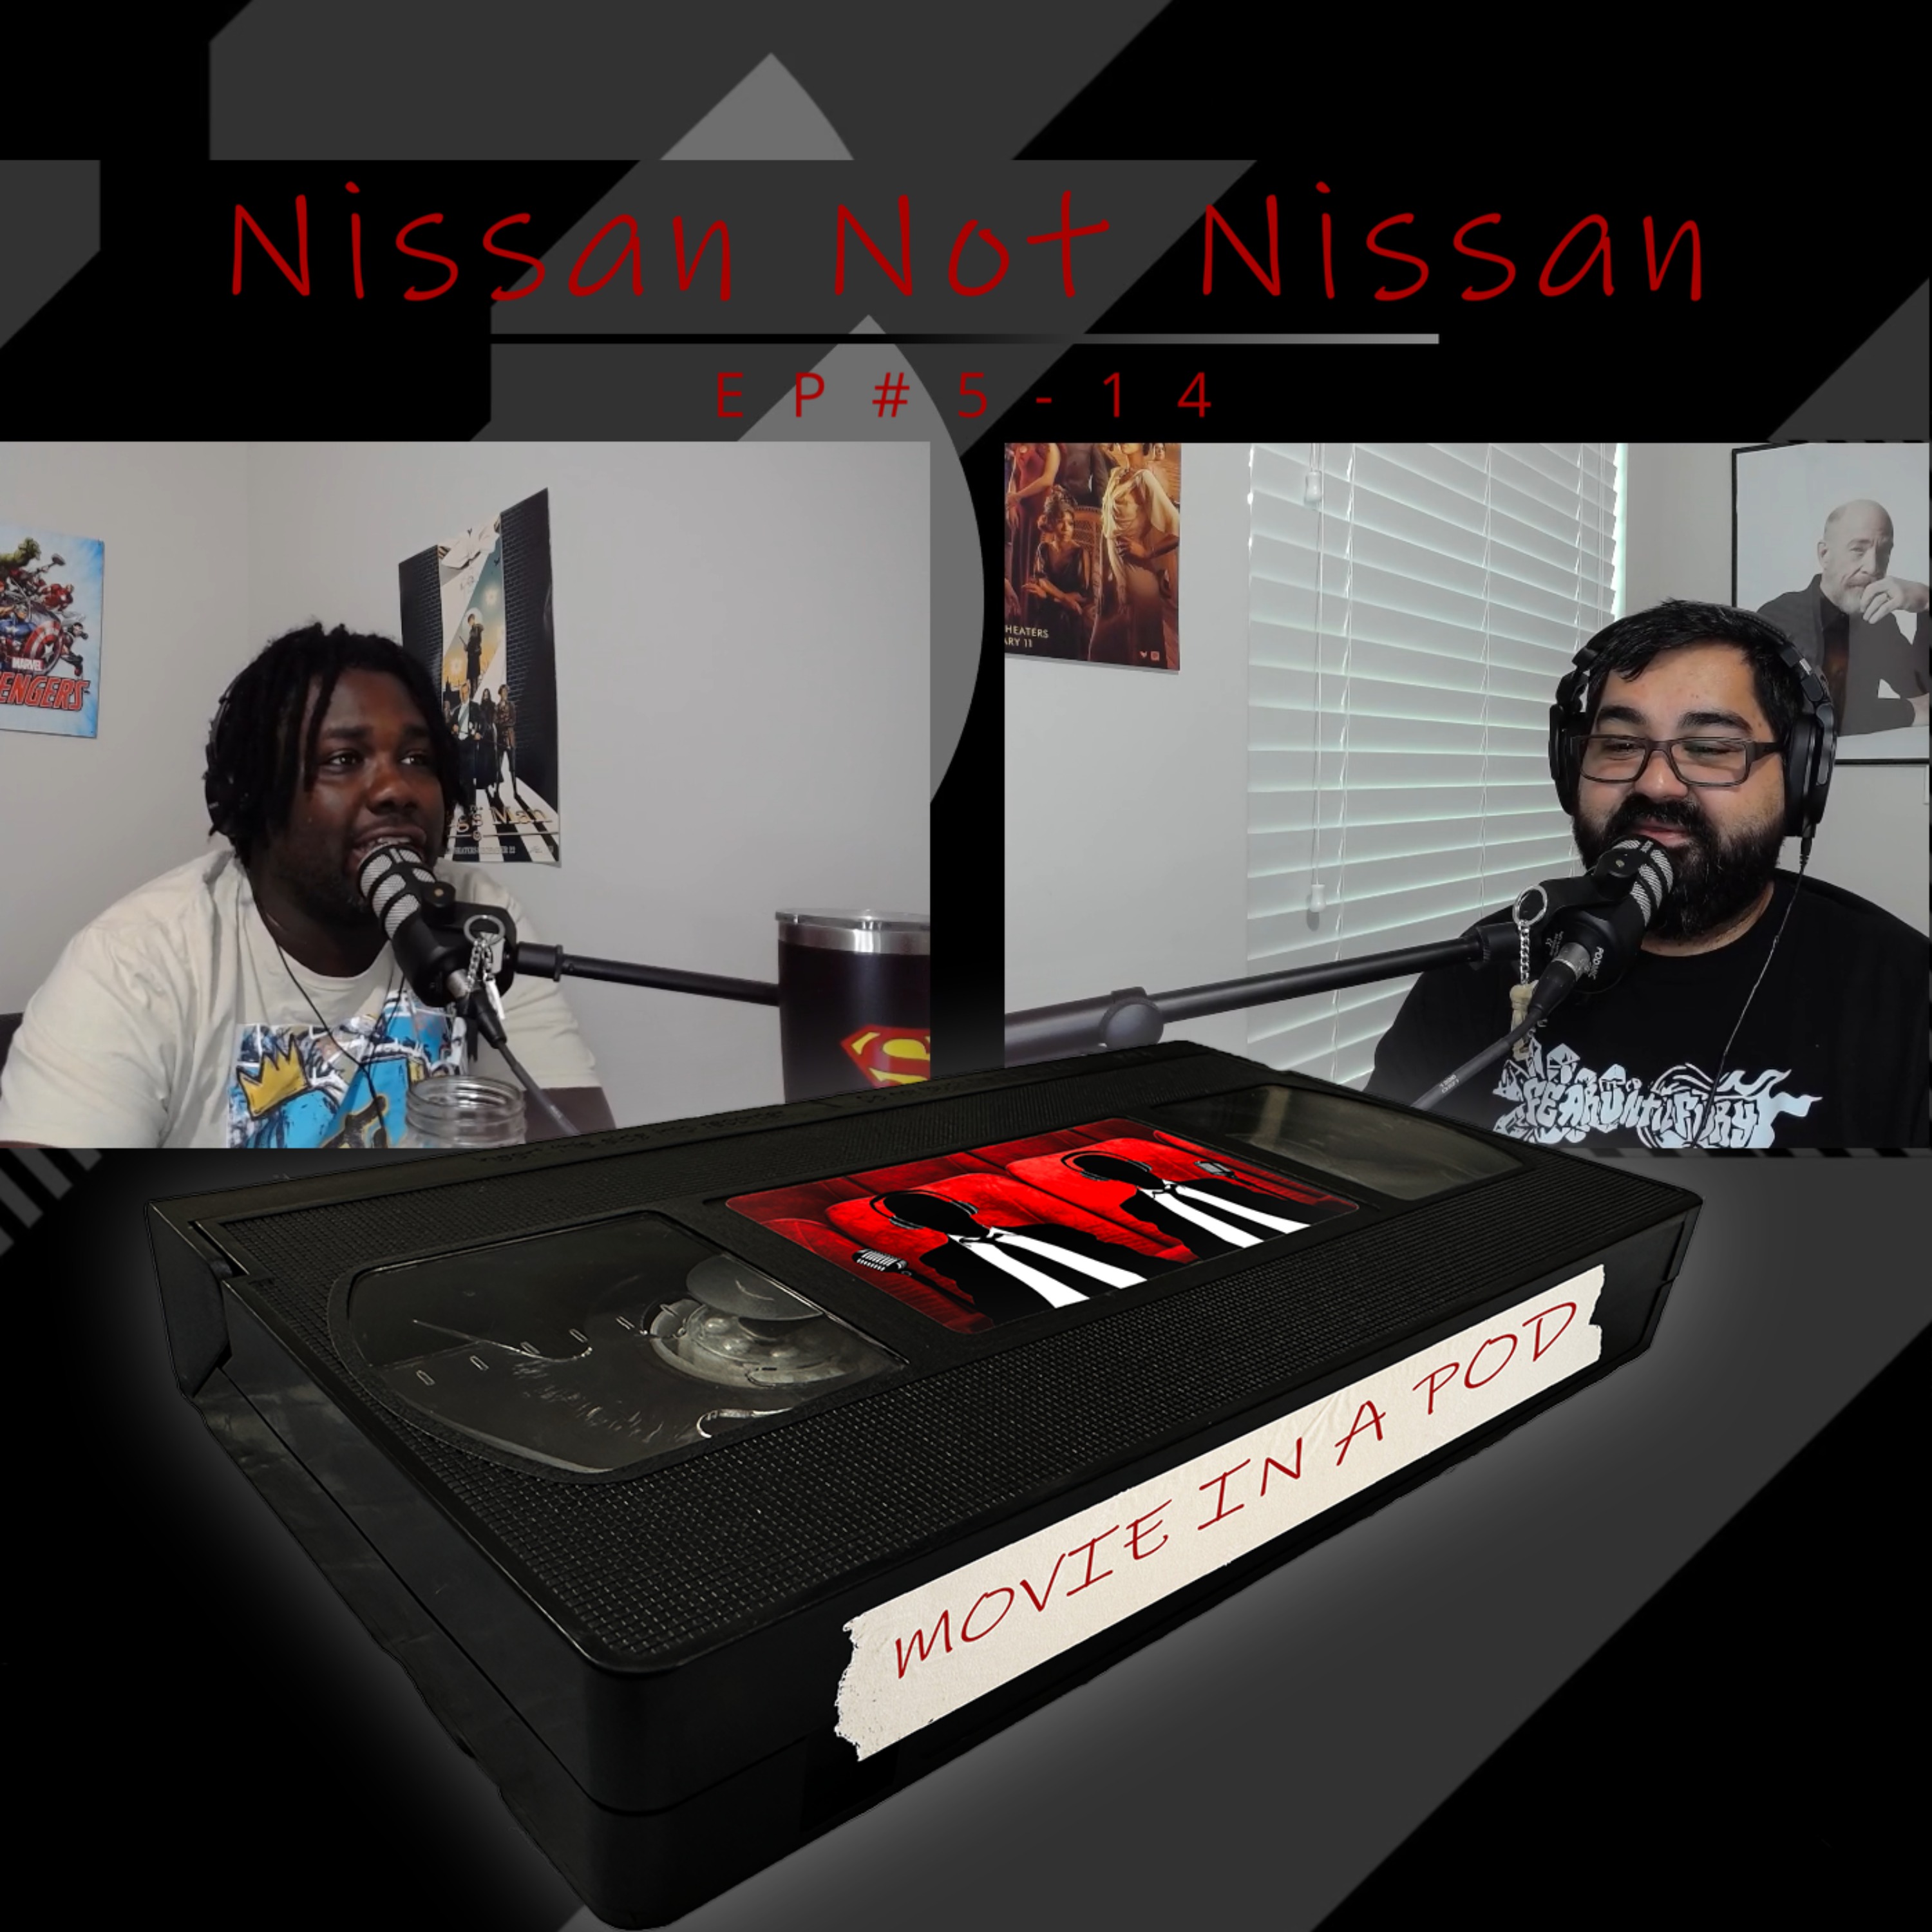 EP#5-14 Nissan Not Nissan